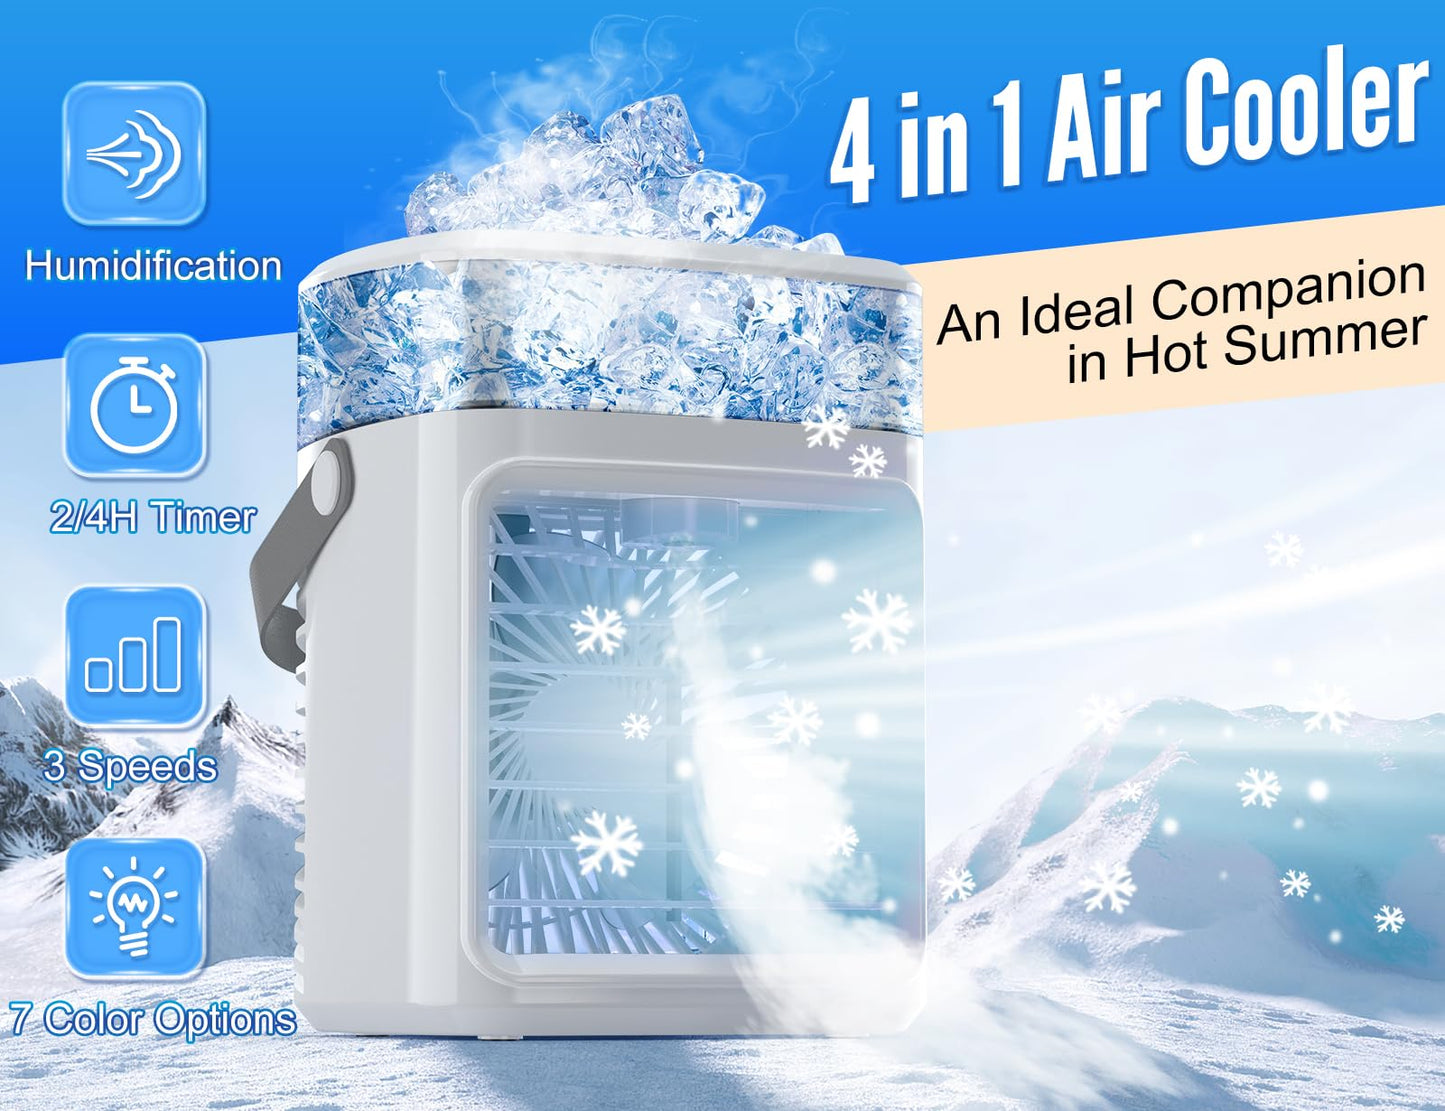 Portable Air Conditioner, 4 In 1 Rechargeable Personal Air Conditioner Cooling Fan, Quiet Evaporative Air Cooler Humidifier Cool Mist Fan with 3 Speeds 7 Colors for Home Office Bedroom Car Camping